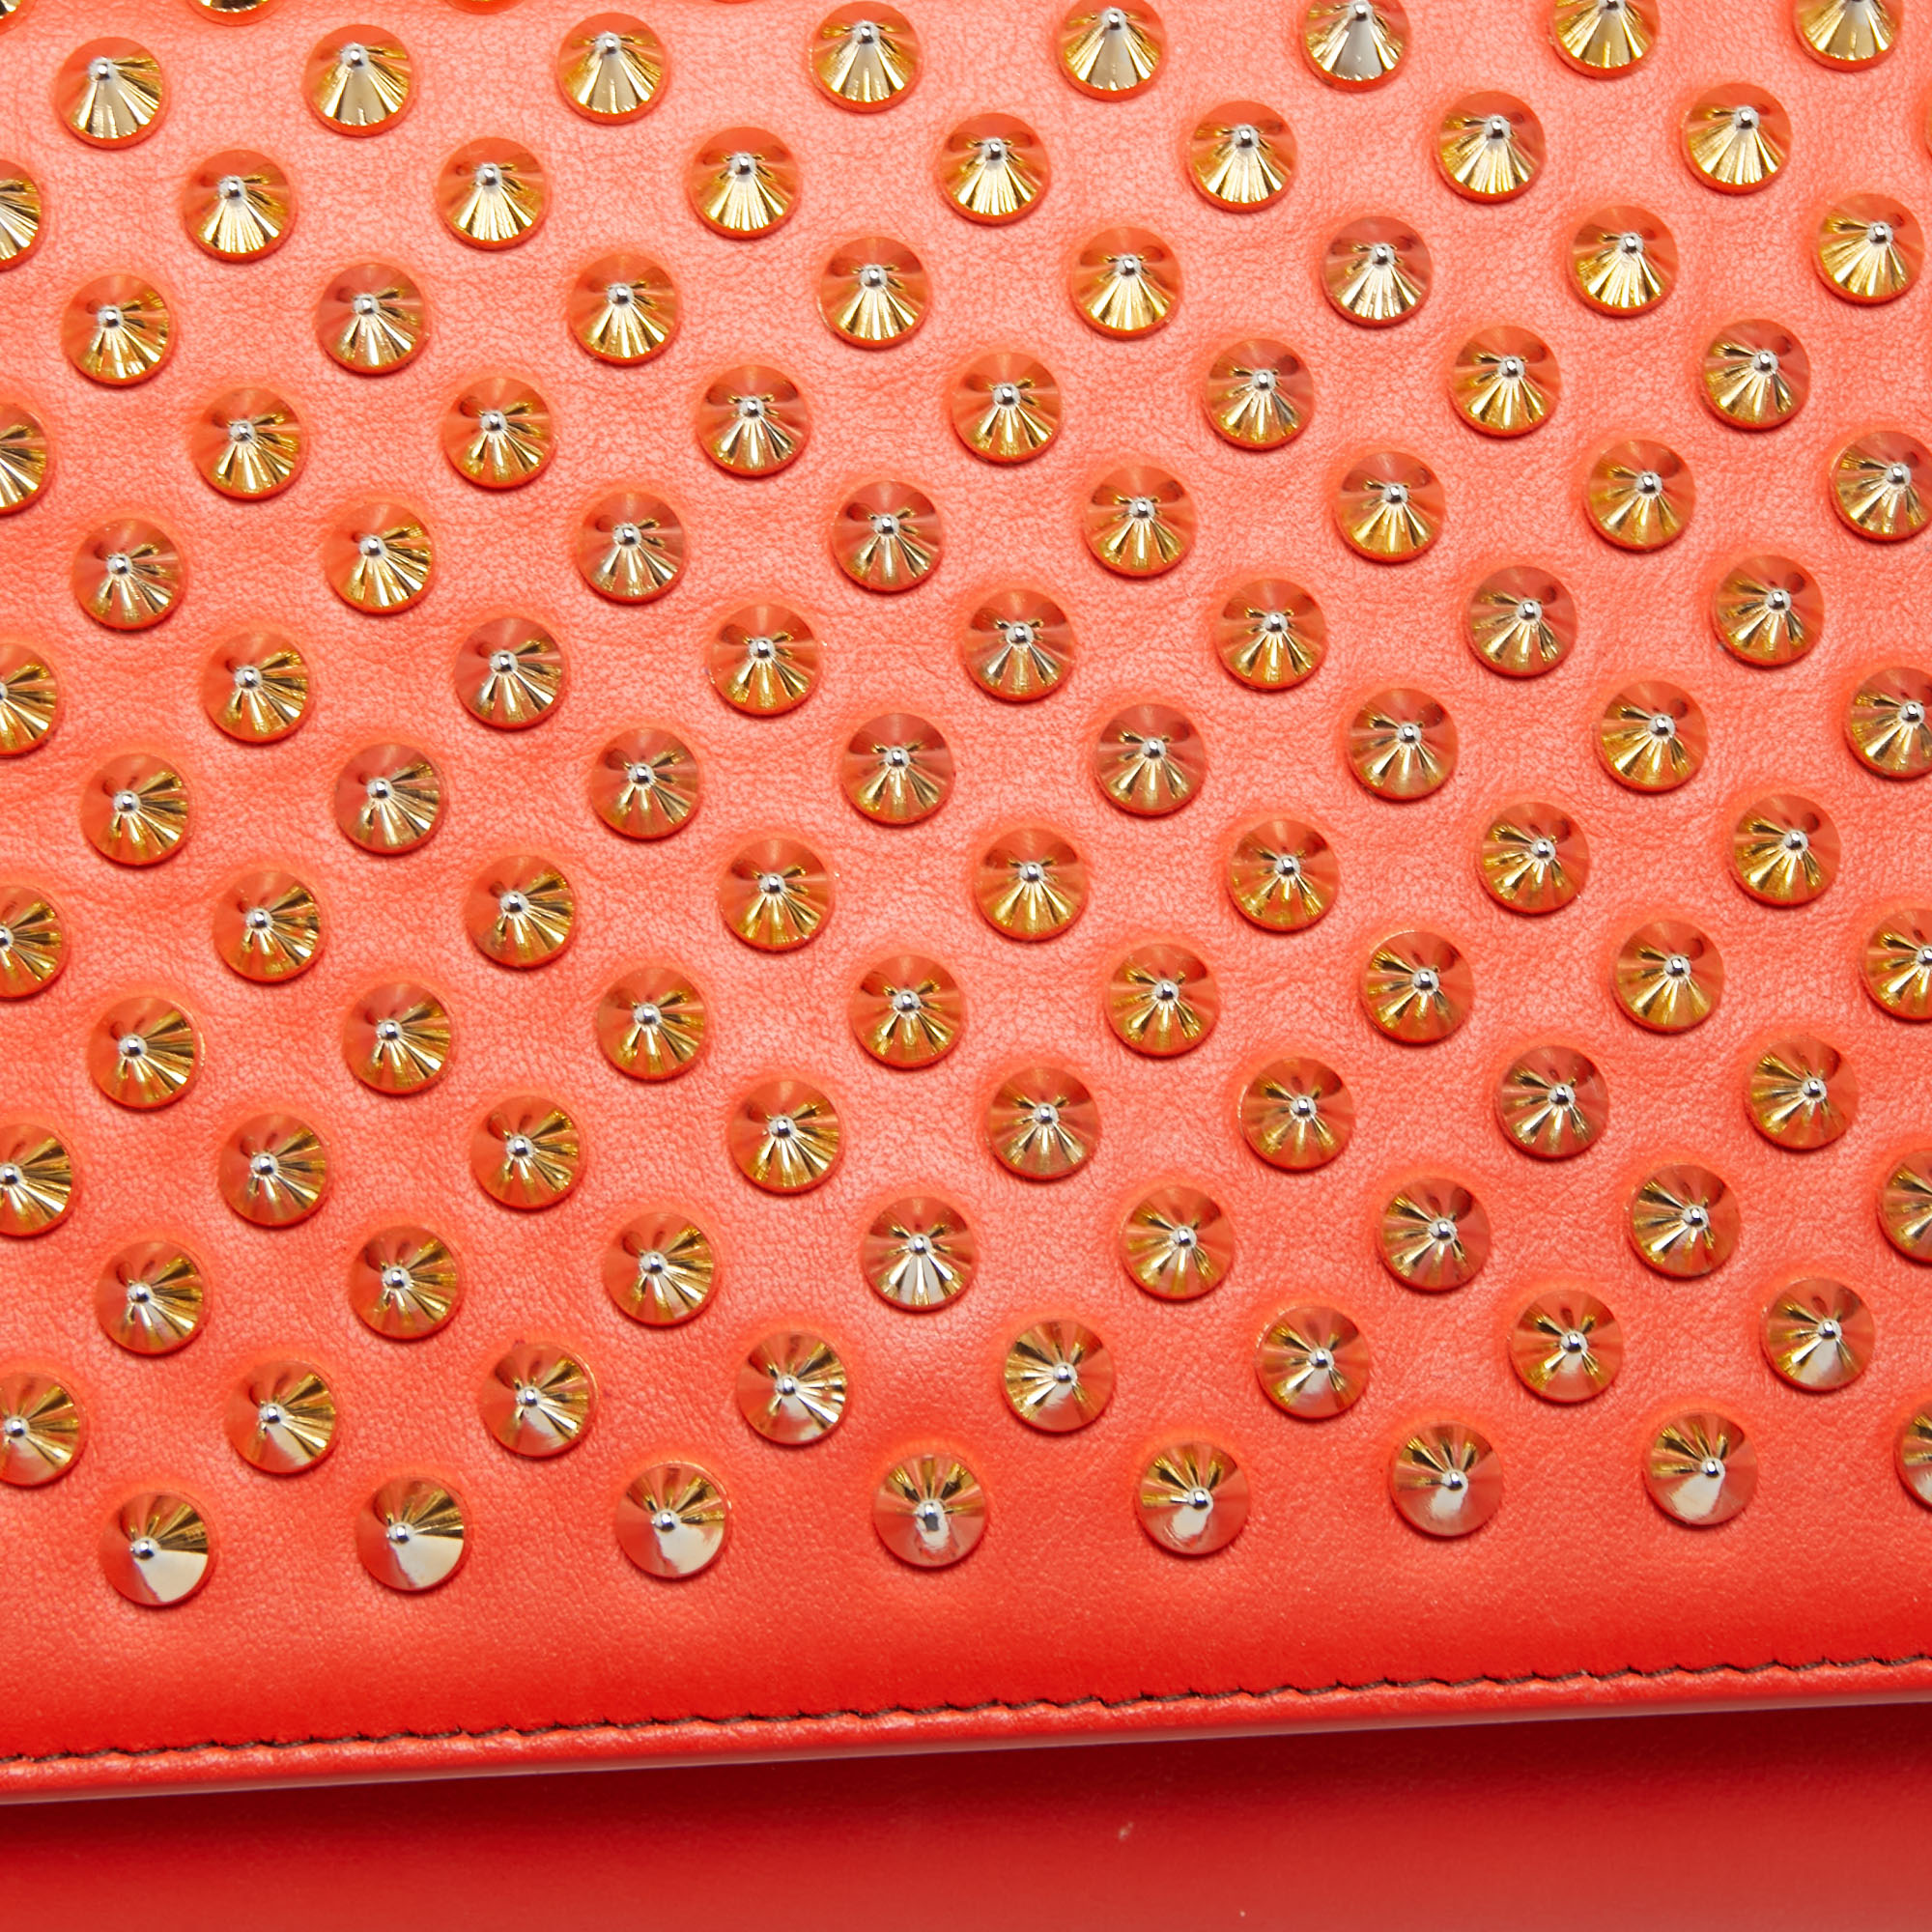 Christian Louboutin Orange Leather Paloma Spiked Chain Clutch